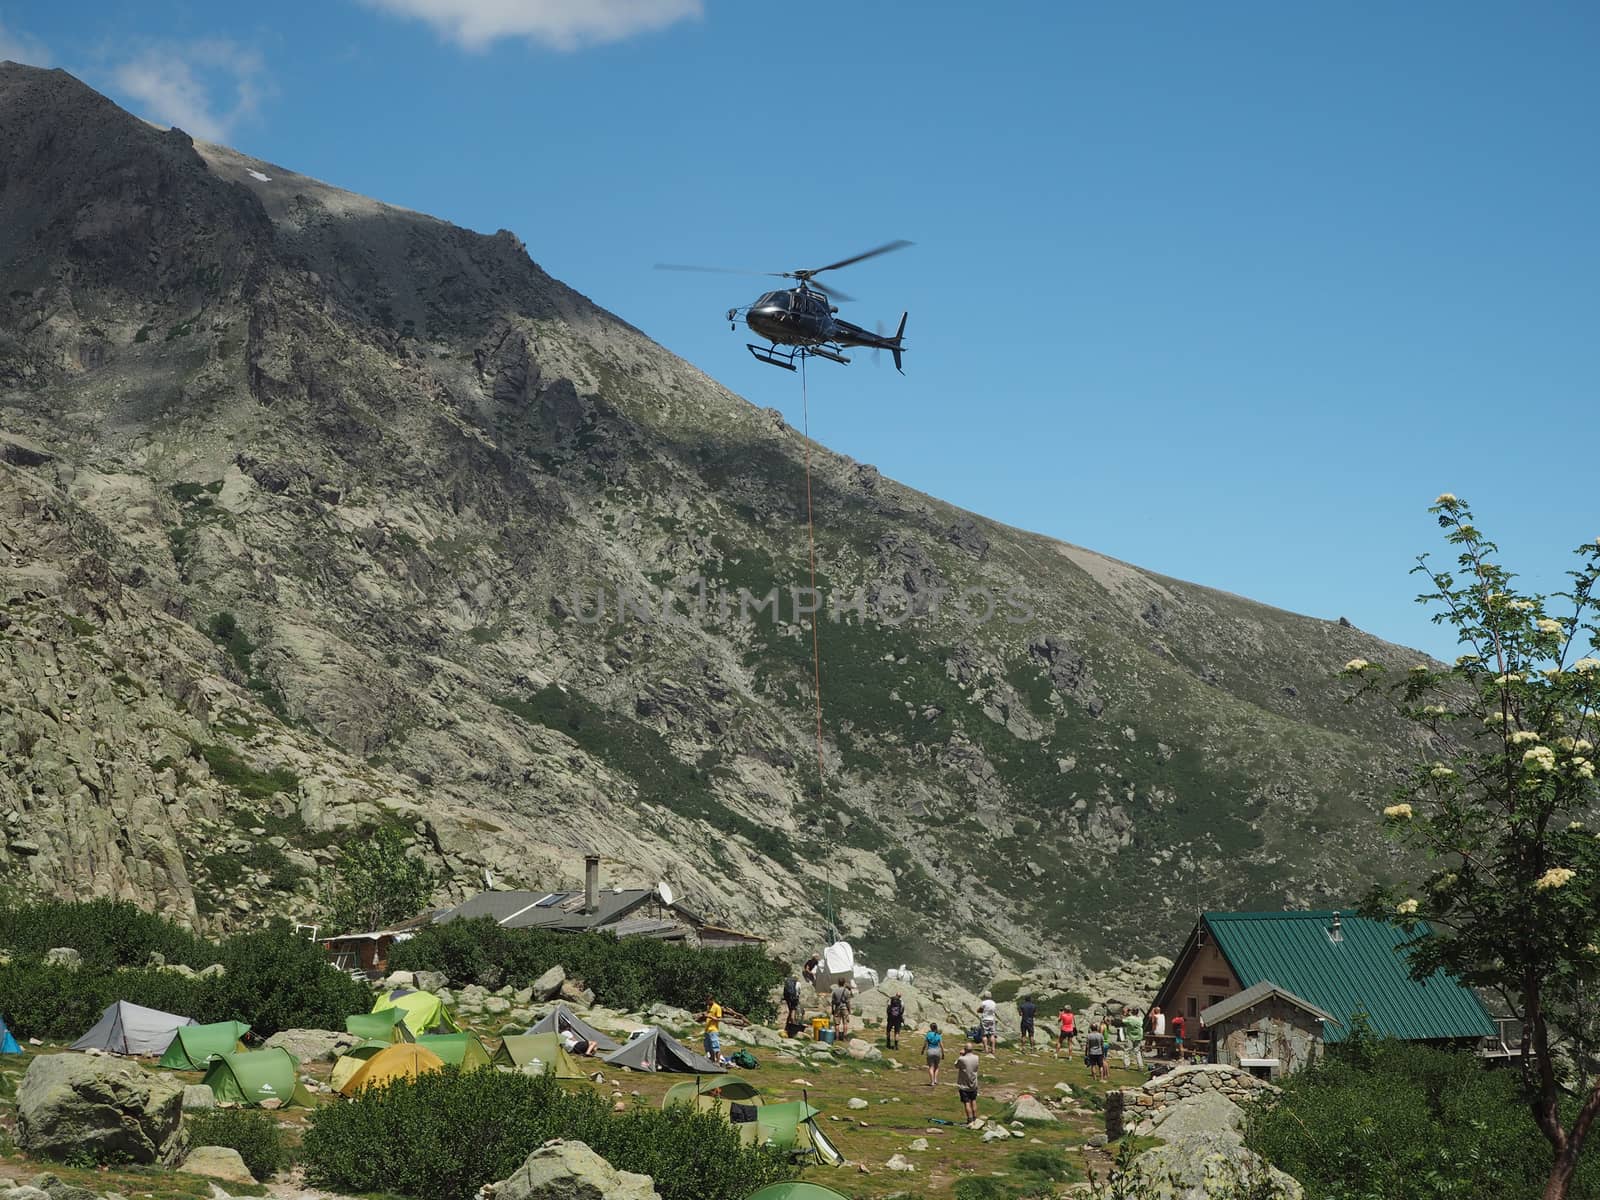 France, Corsica, Corsician Alps, June 19, 2017: helicopter dropping off supplies for mountain camp Refuge de Pietra Piana on famous hiking trail GR20, rocks, tents, tree and blue sky background